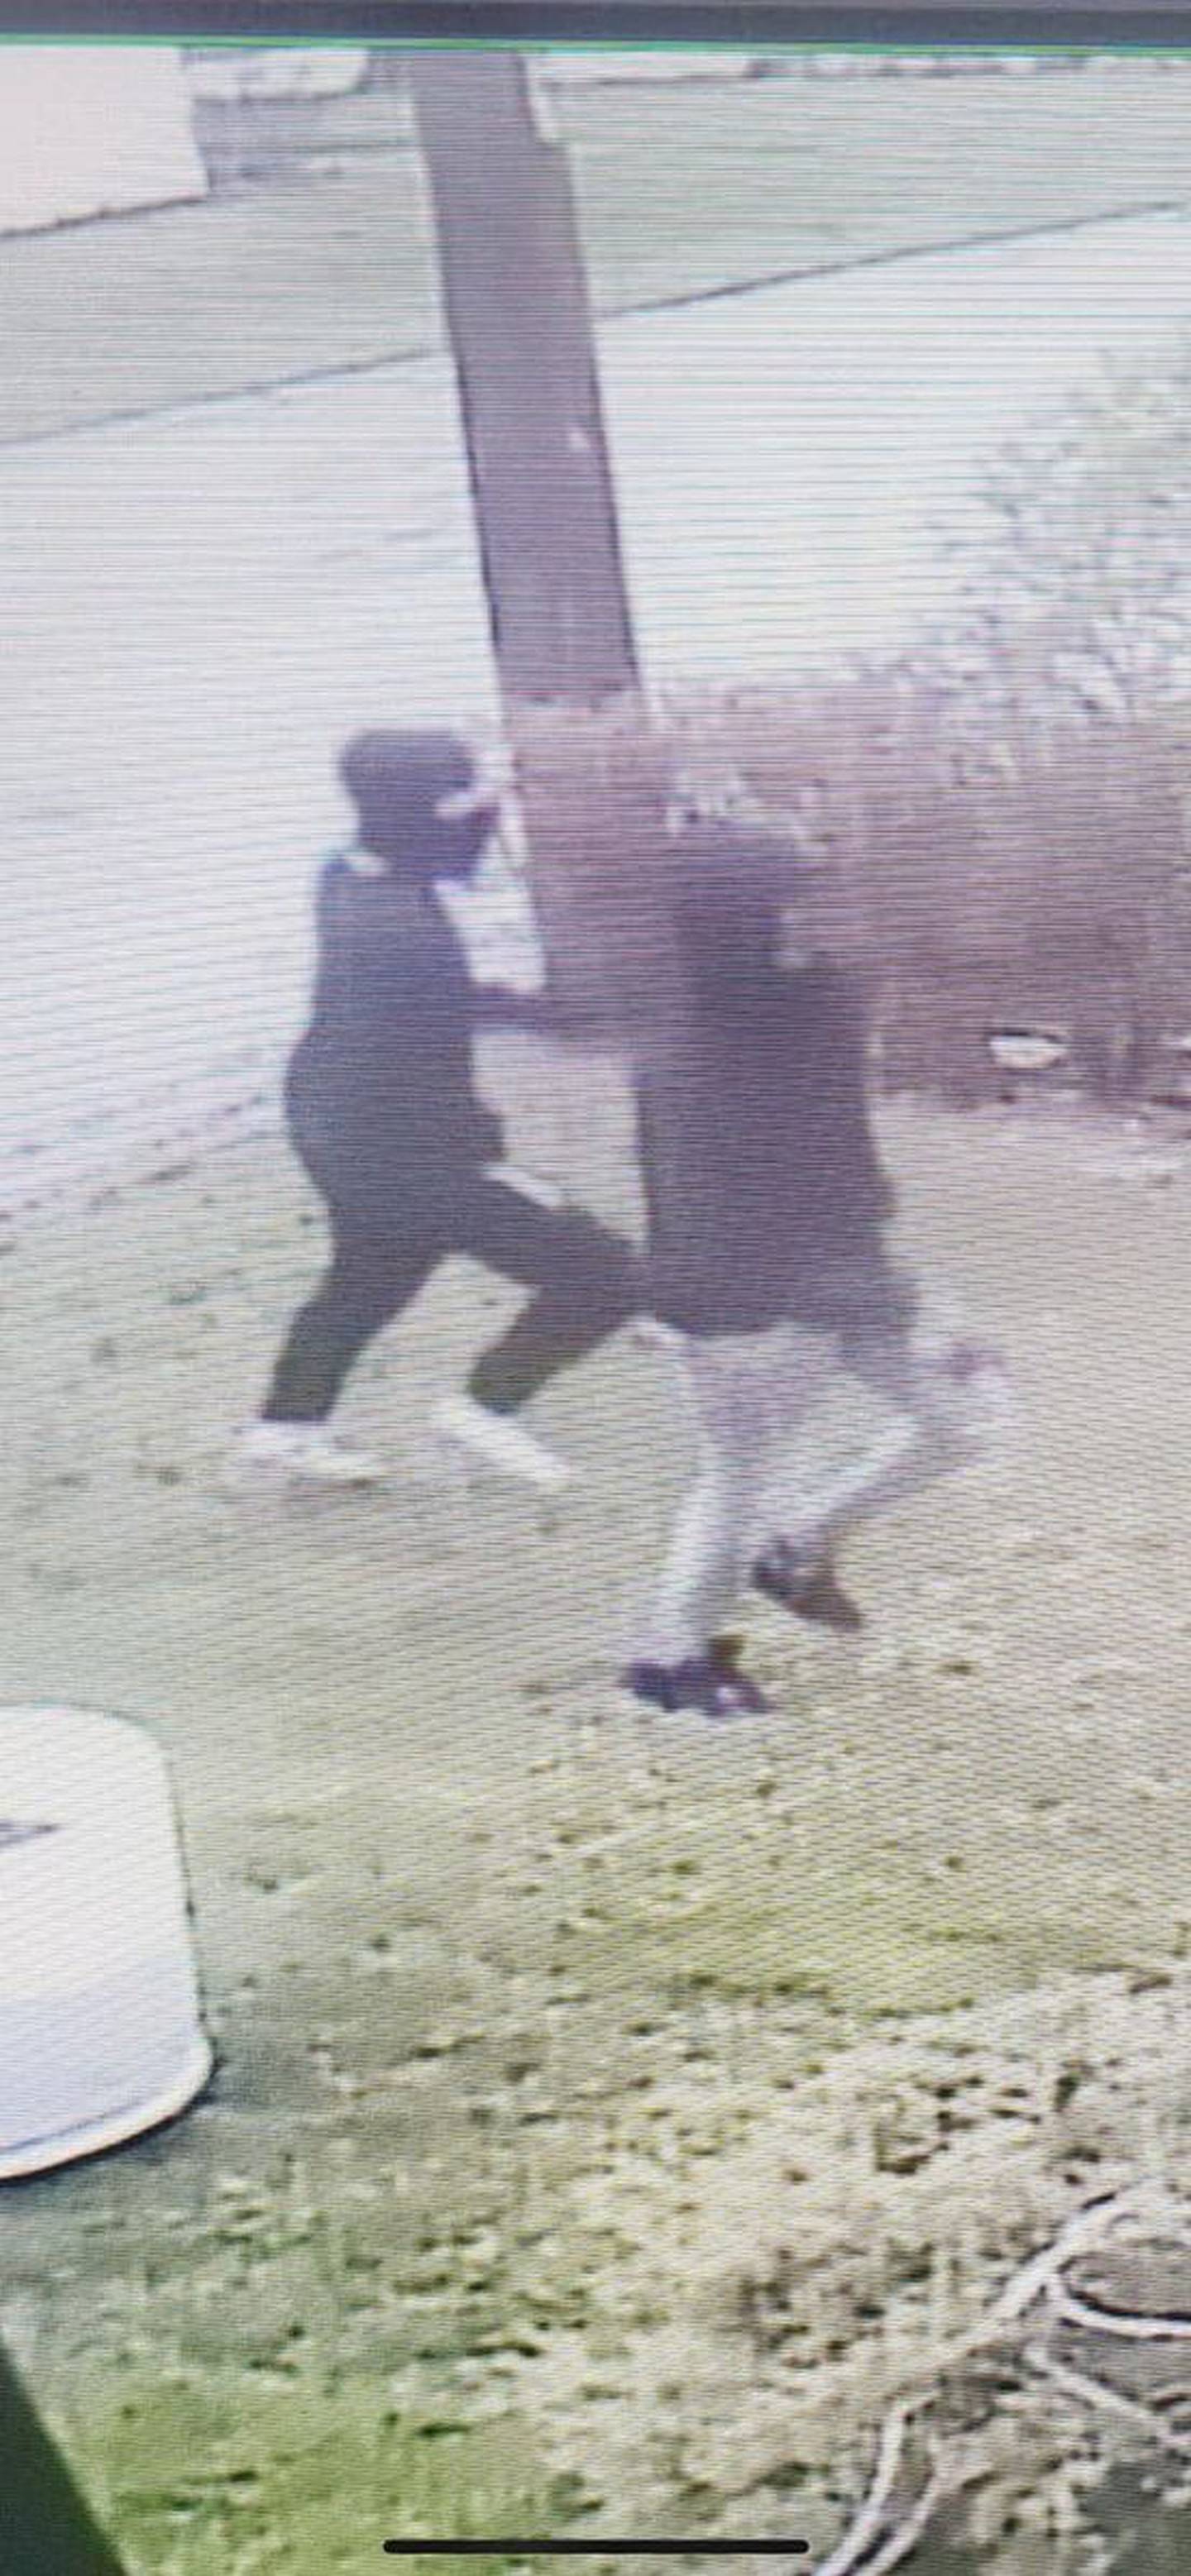 The Crest Hill Police Department posted on its Facebook page these images from security cameras in the area of ​​the shooting on Theodore Street on Tuesday, April 2.  The two people in this image were seen north of Merichka's restaurant between 1pm and 2pm on Tuesday, according to police.